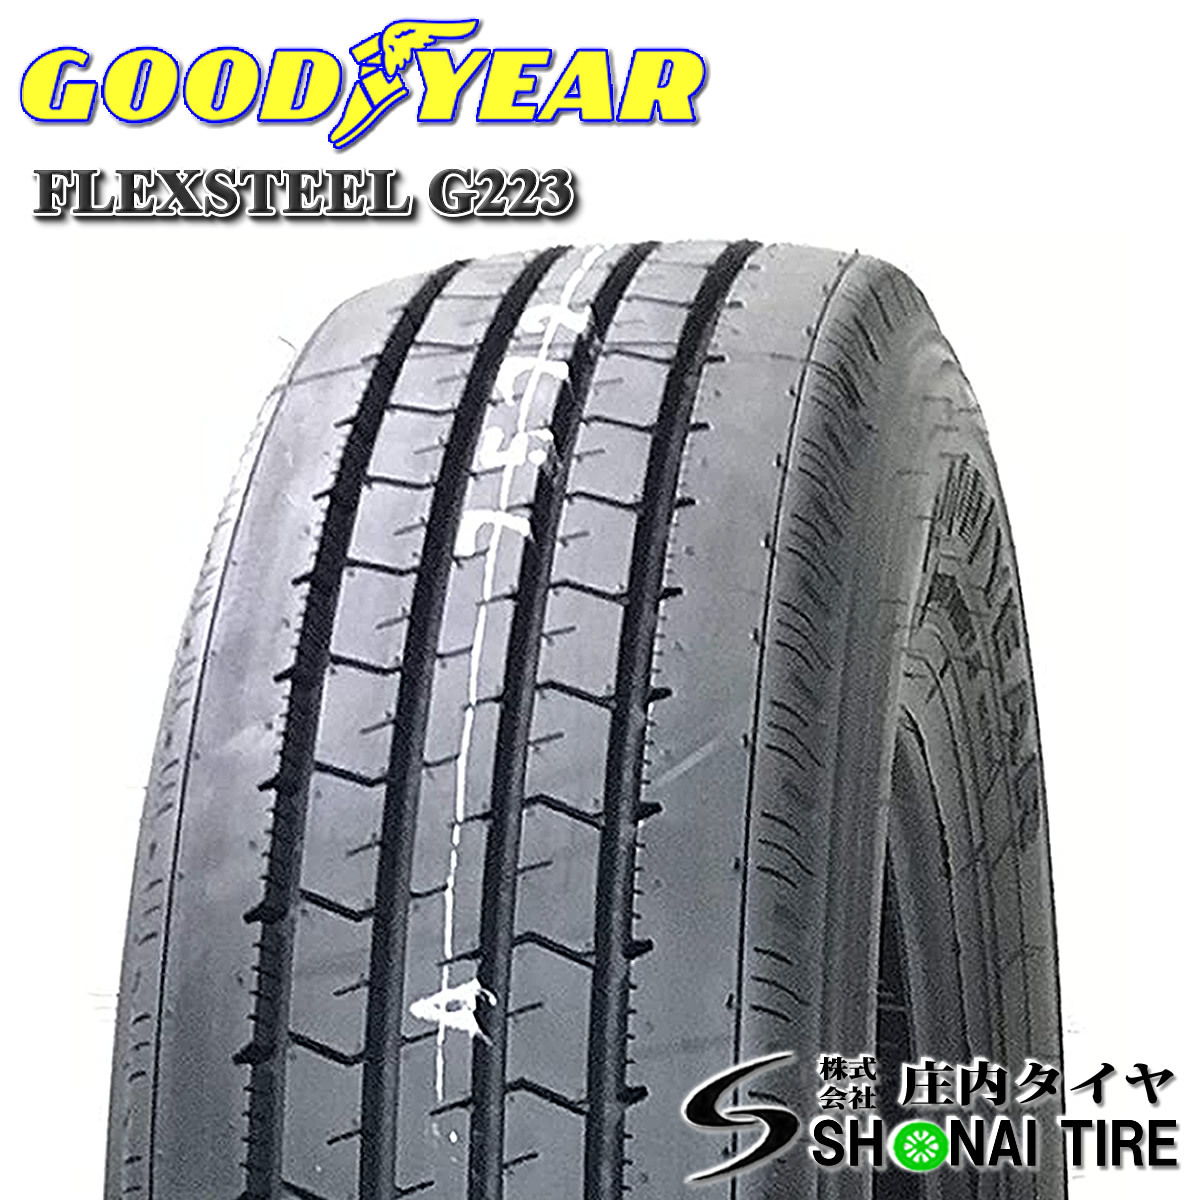  stock necessary verification Dyna for Goodyear FLEX STEEL G223 205/80R17.5 LT iron wheel attaching 17.5×5.25 +113 6ps.@ price summer NO,GY011SH363-6